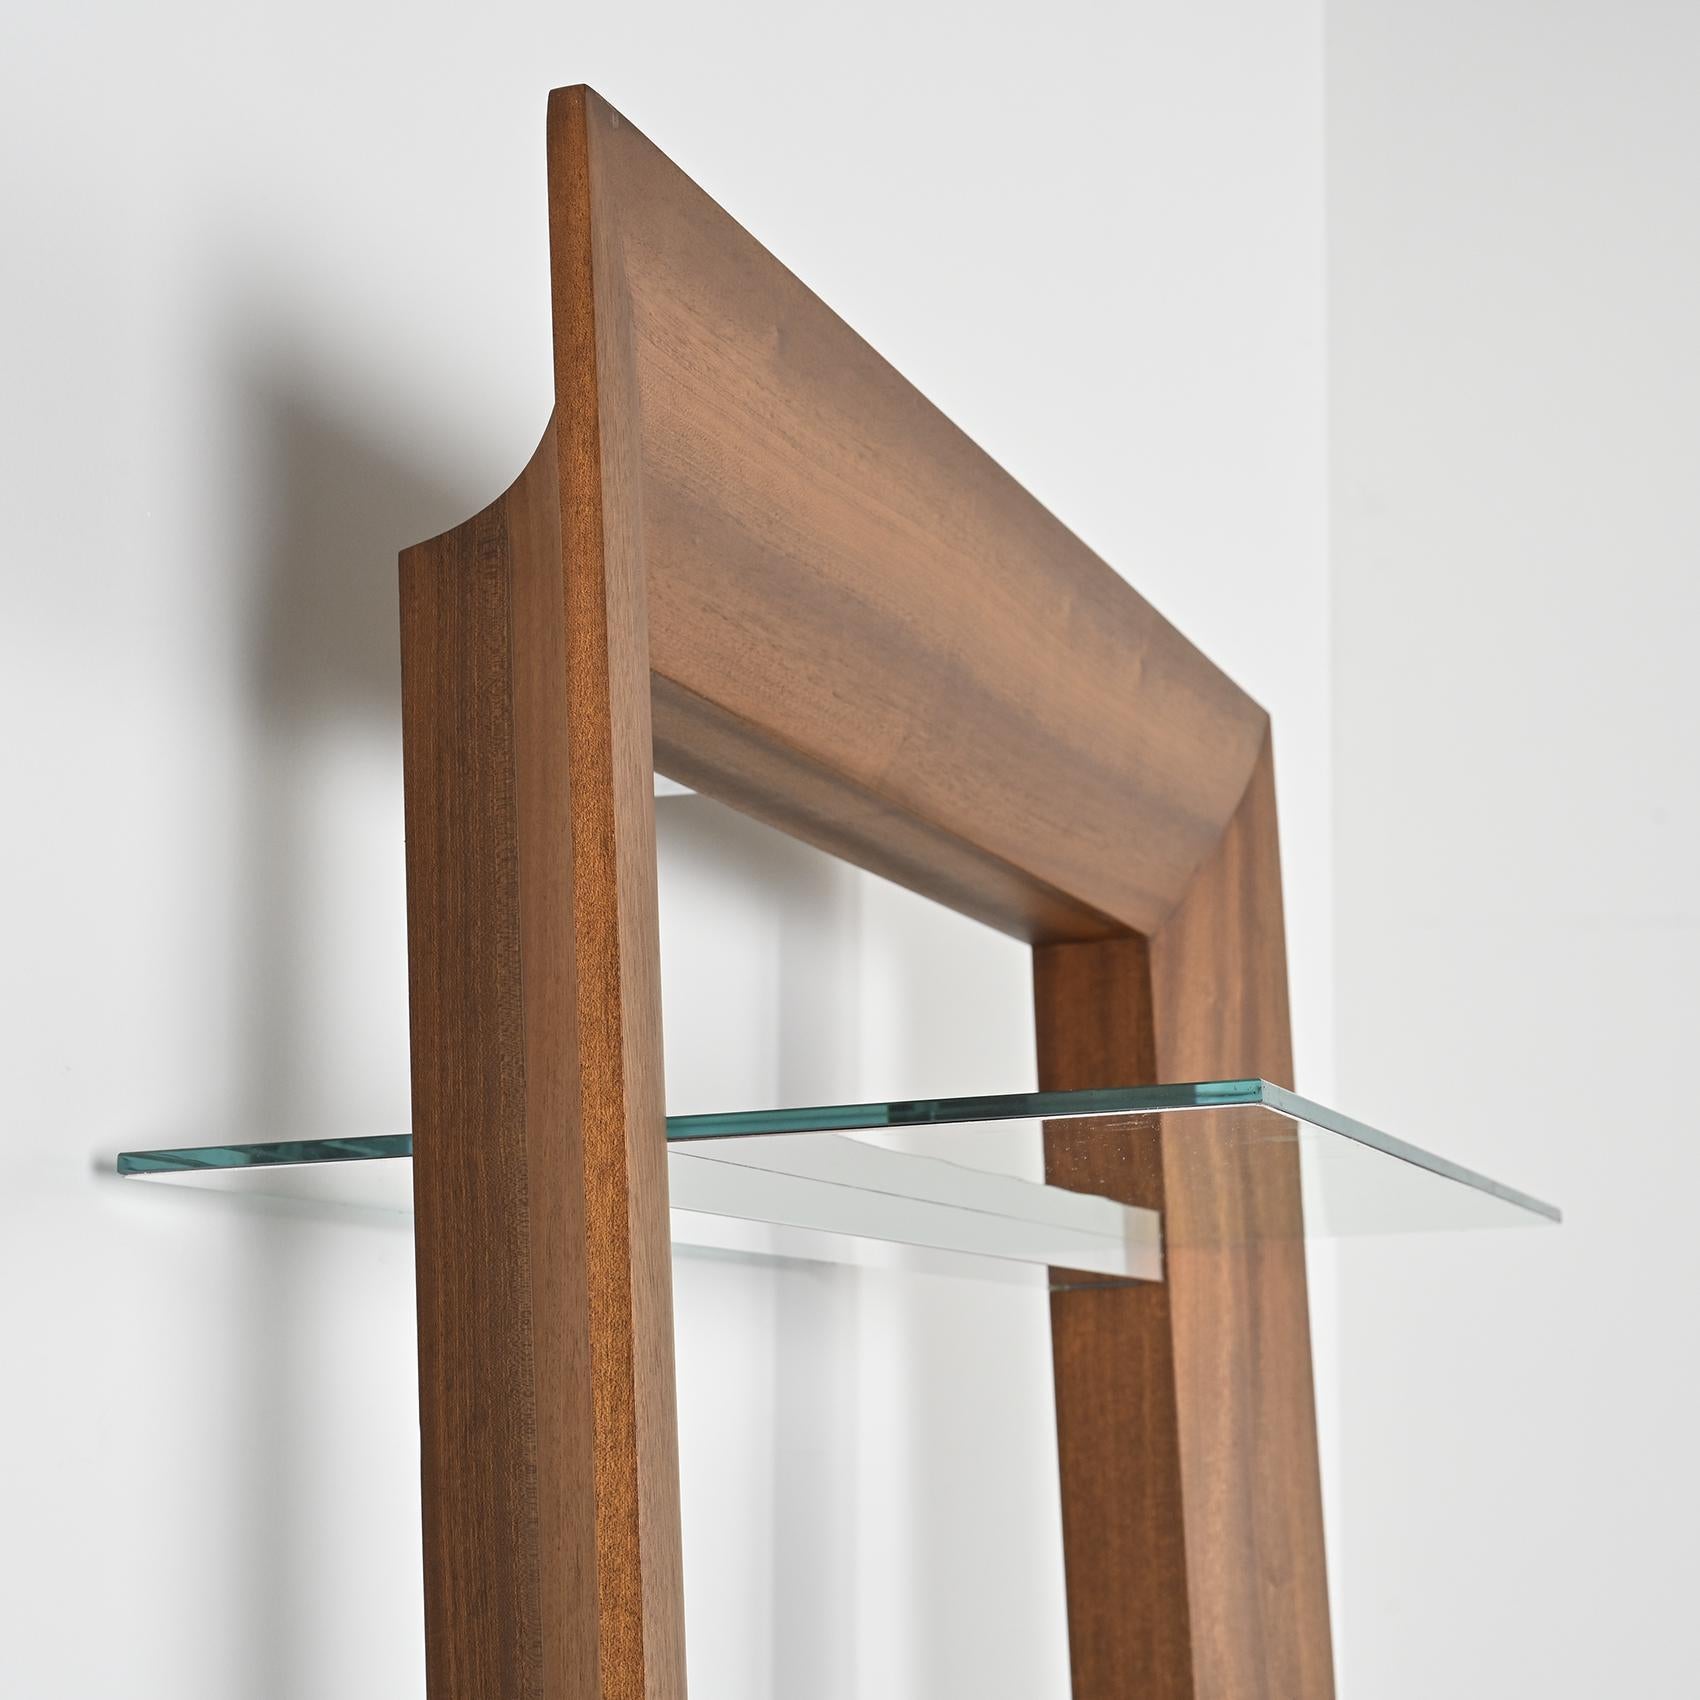 Contemporary A Pair of Modular Mirror-Bookshelves by Philippe Starck, Driade 2007 For Sale